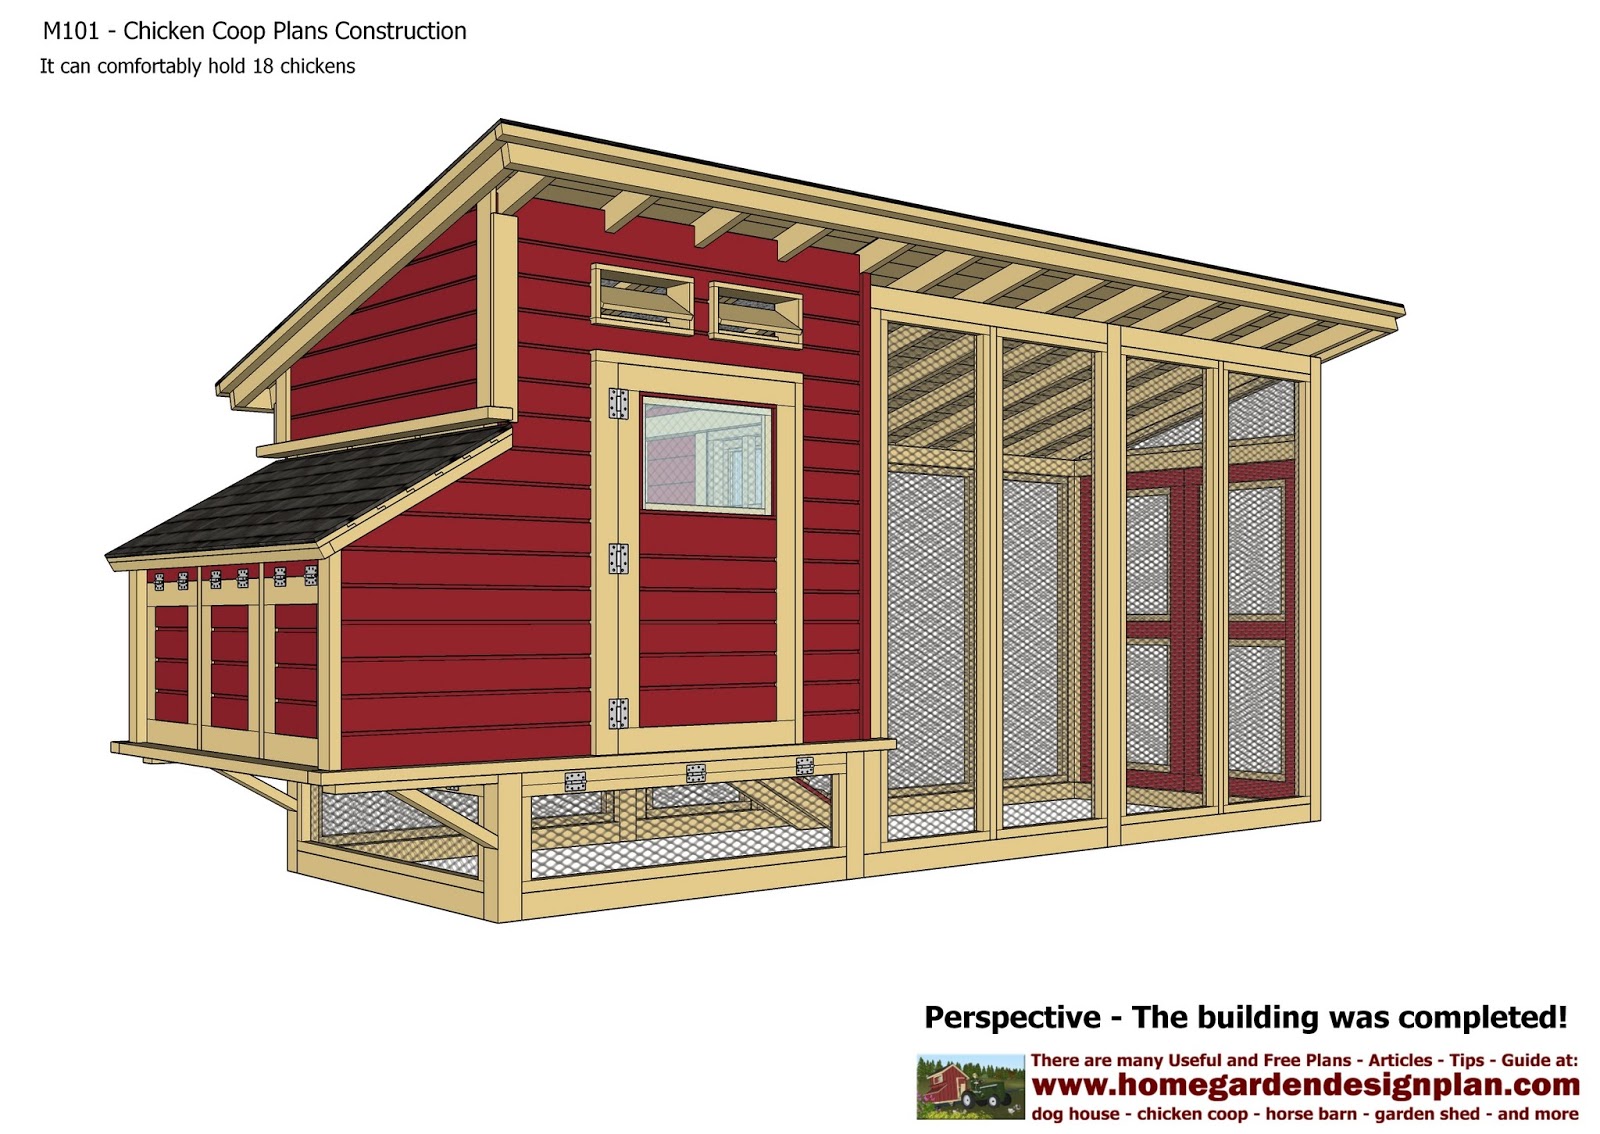 Chicken Coop Kits - What is The Right Choice anyone ...